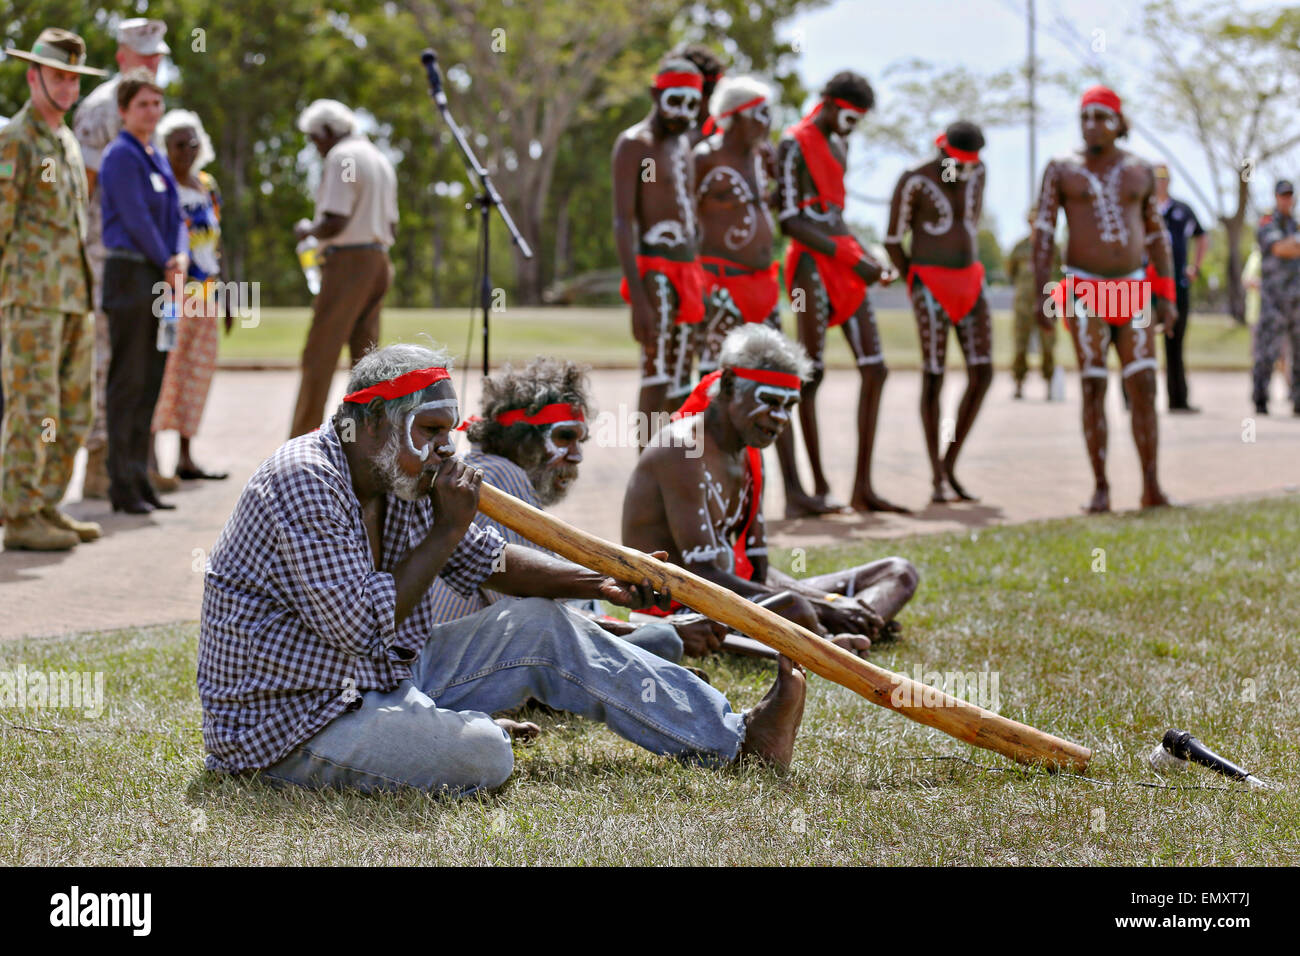 Australian Aborigines play traditional music using a didgeridoo during a welcome ceremony for the U.S. Marines at the Brigade Parade Ground at Robertson Barracks April 22, 2015 in Palmerston, Australia. Stock Photo